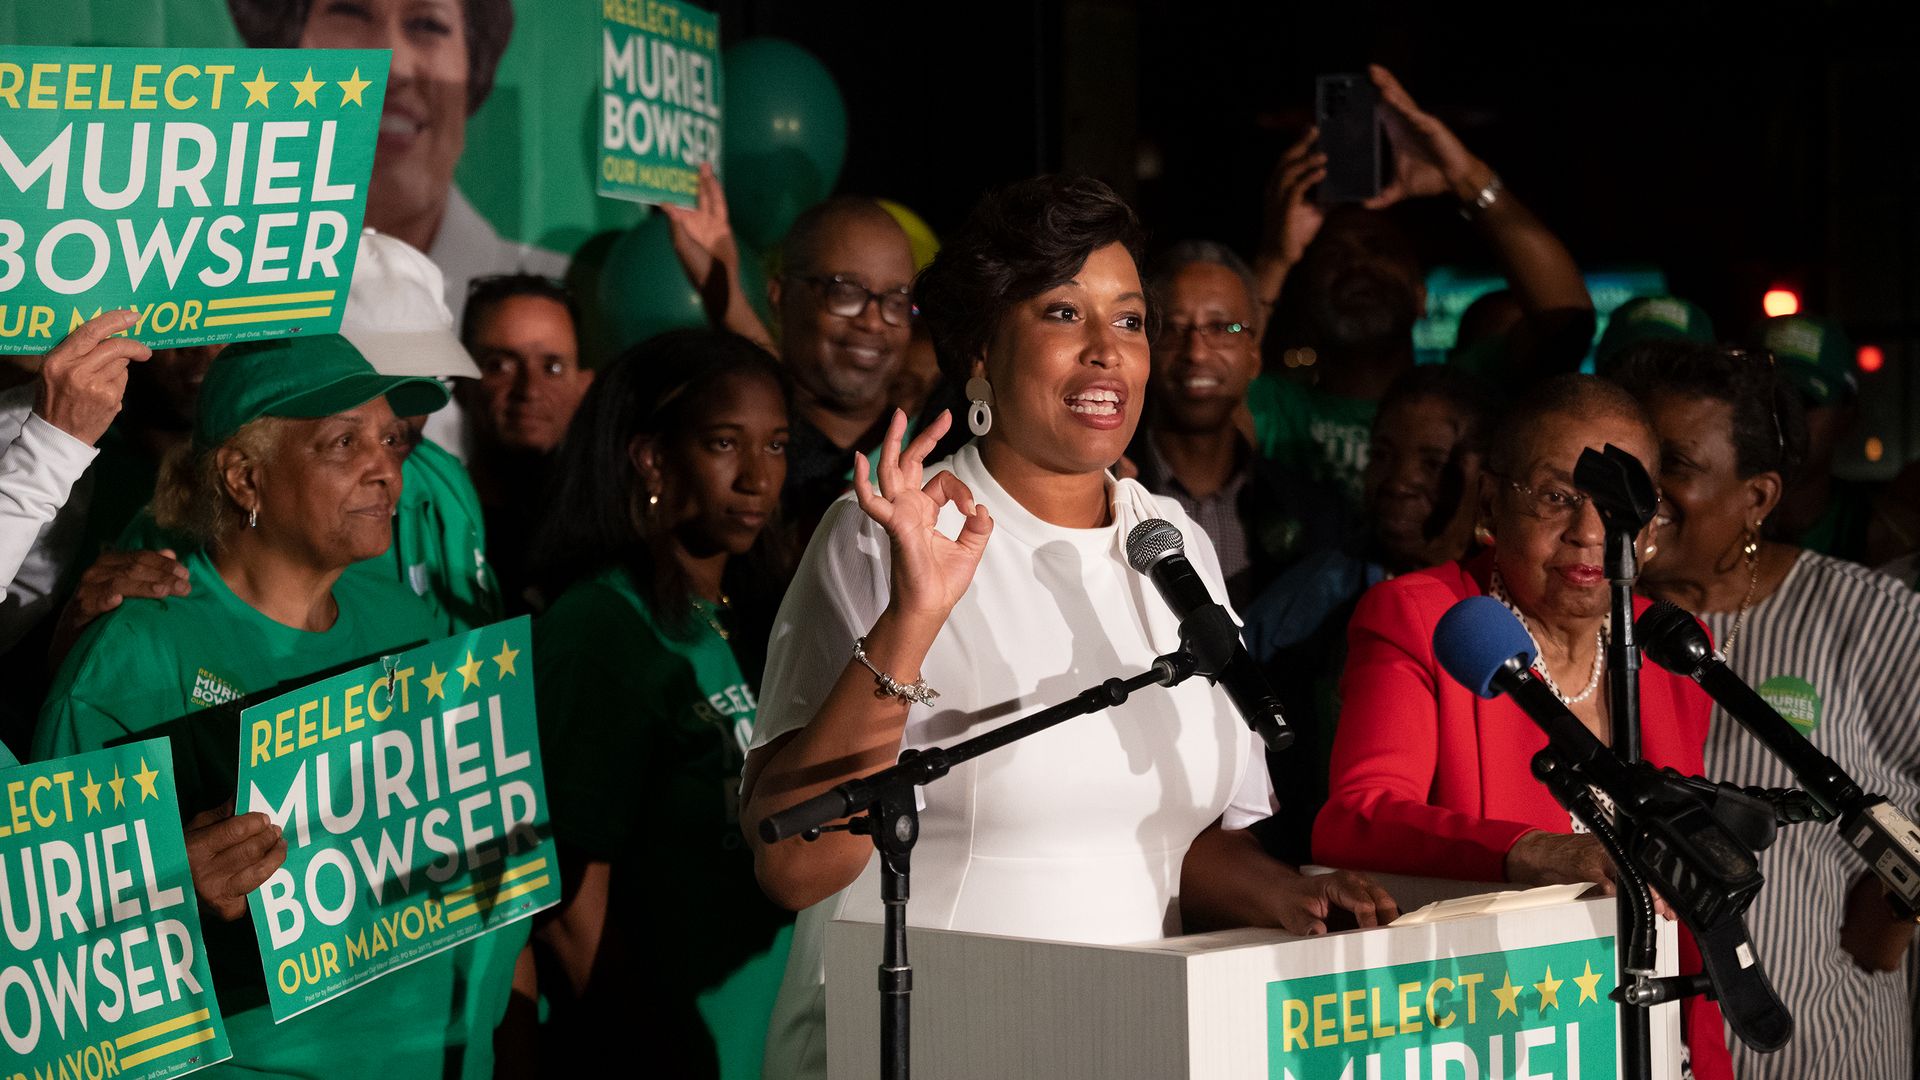 Muriel Bowser gives victory speech